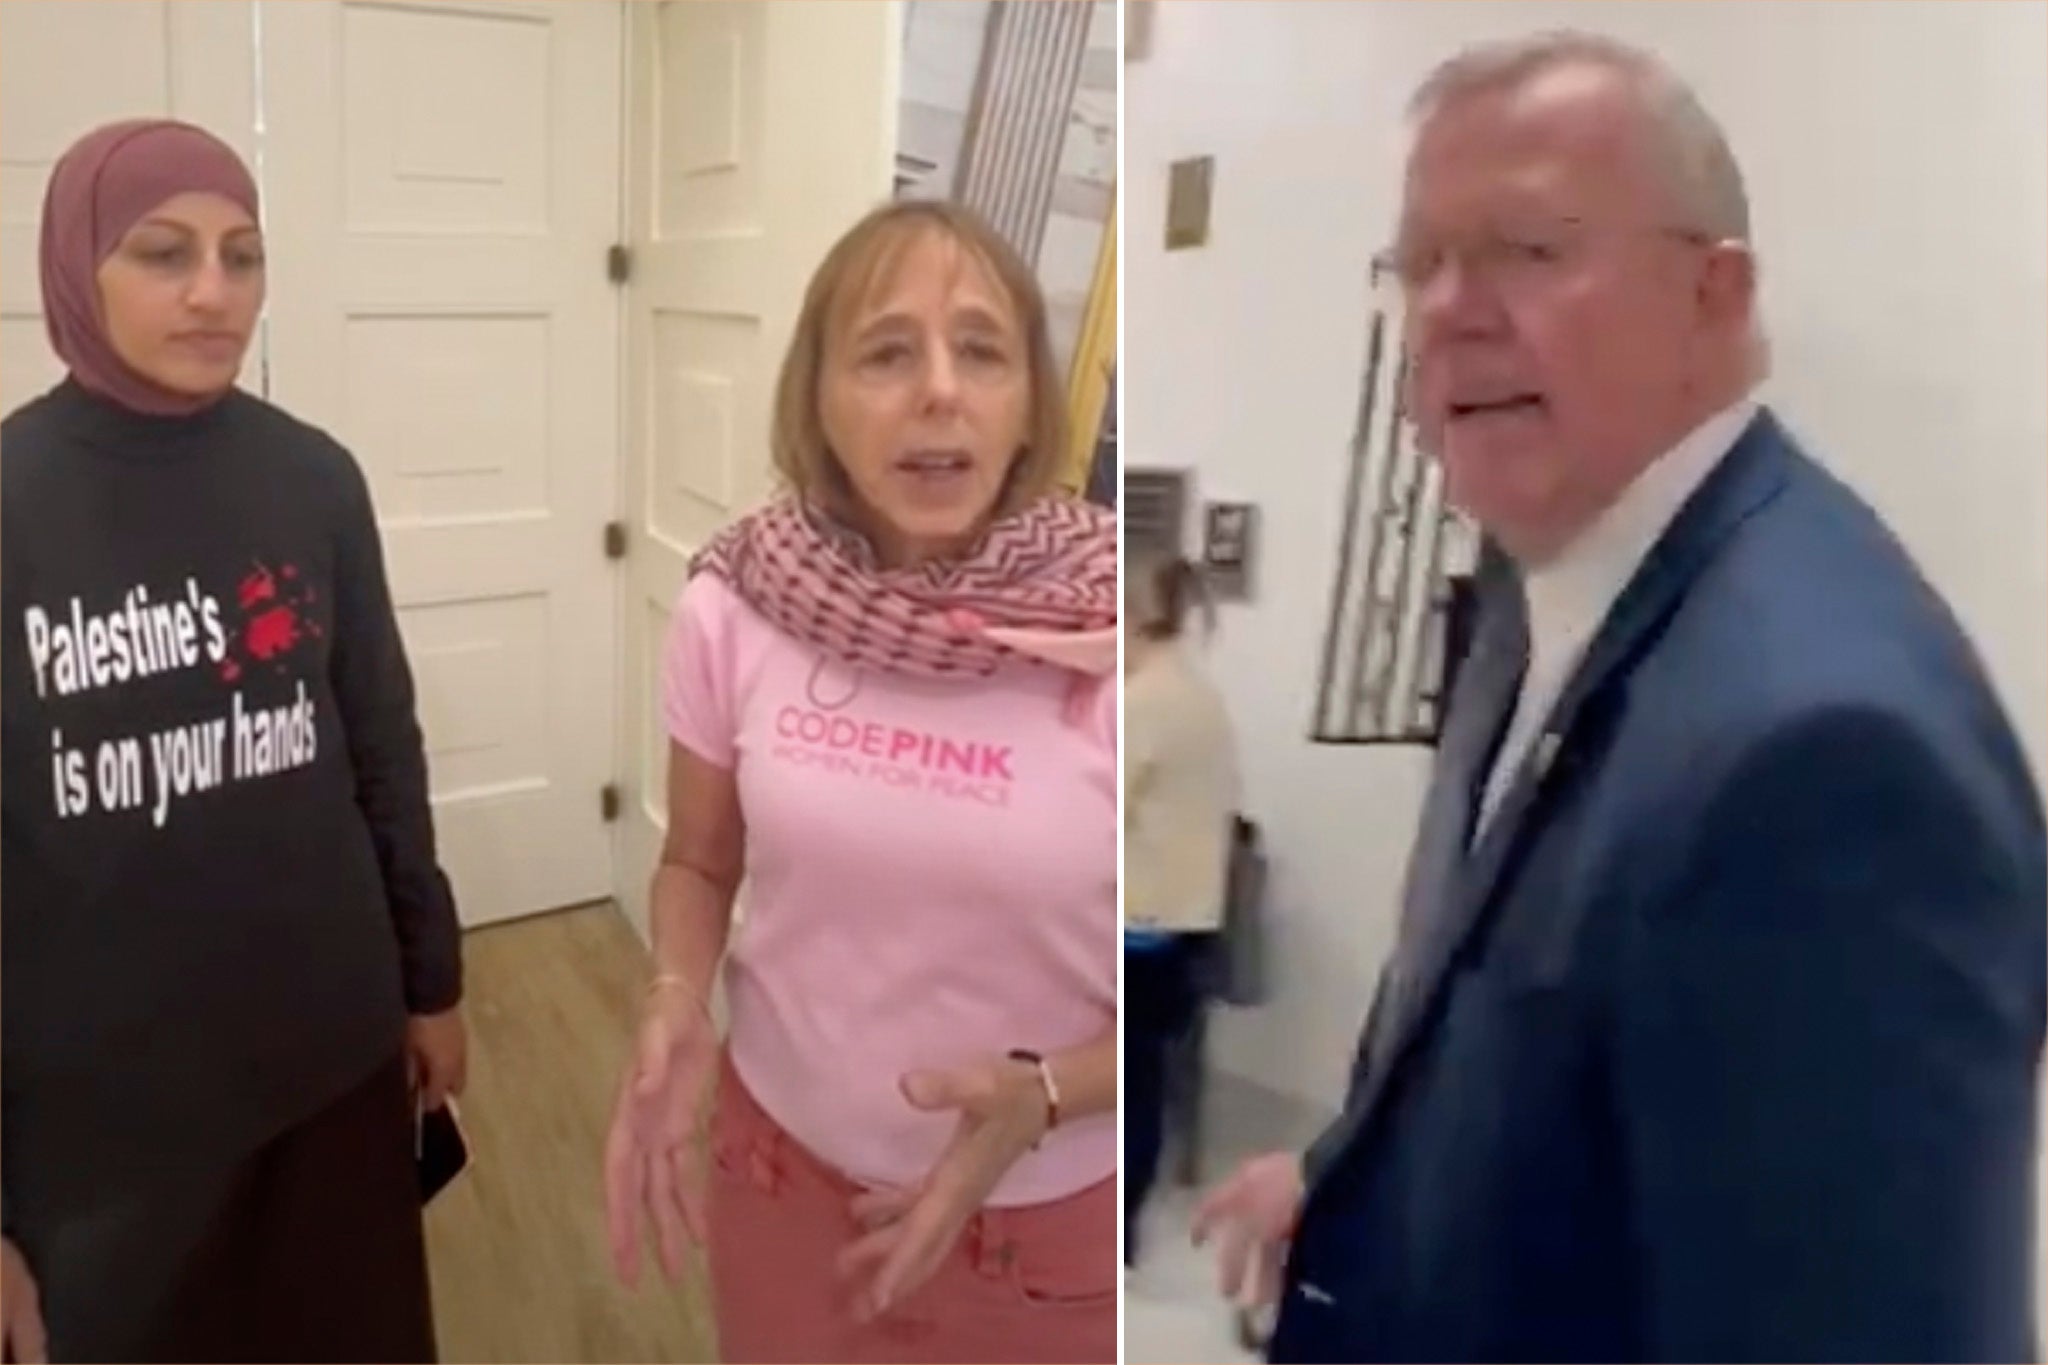 Sumer Mobarak (left) and Medea Benjamin (centre), antiwar protesters with Code Pink, spoke to Congressman Mike Ezell (right) on Tuesday about the Israel-Hamas war. Video footage of the conversation indicates that Mr Ezell knocked the phone out of Ms Mobarak’s hand